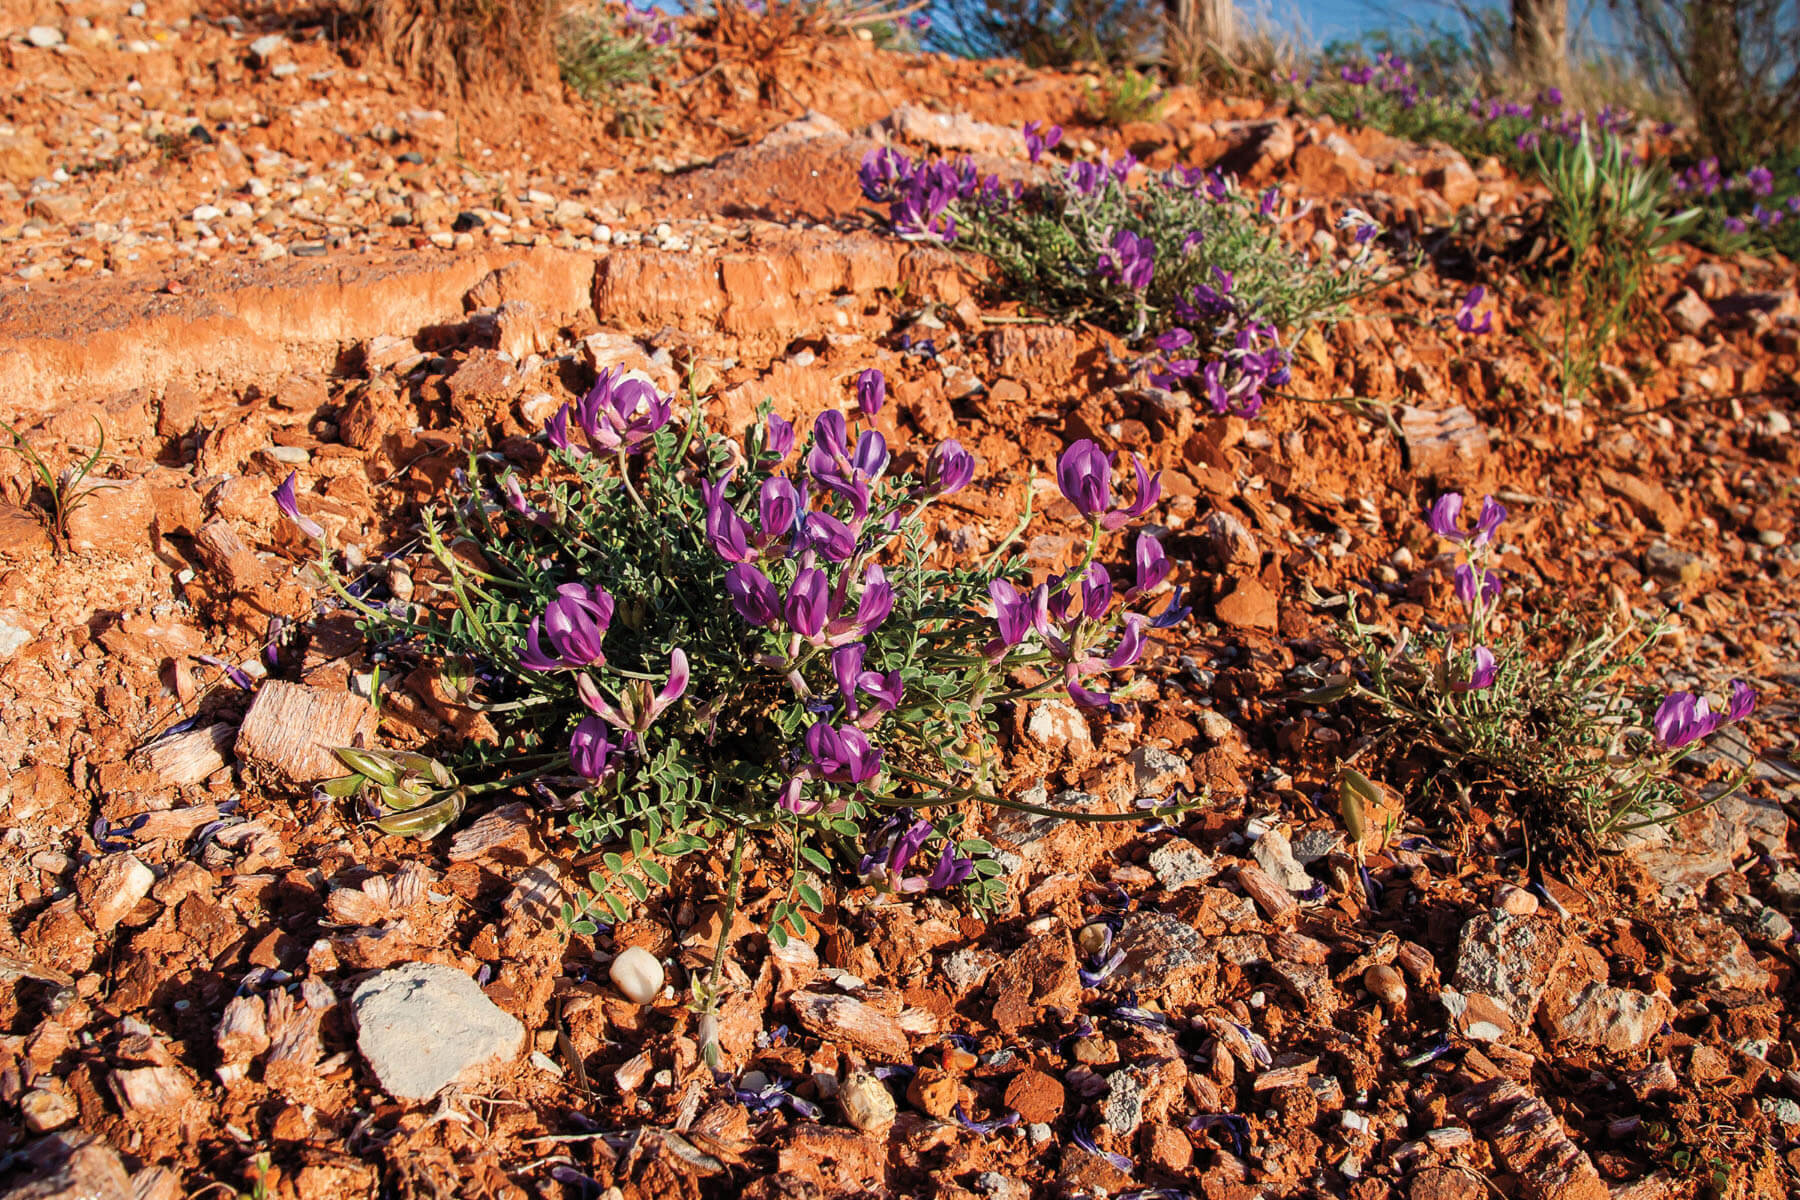 Small purple flowers on a grreen plant grow from a rocky red desert landscape.